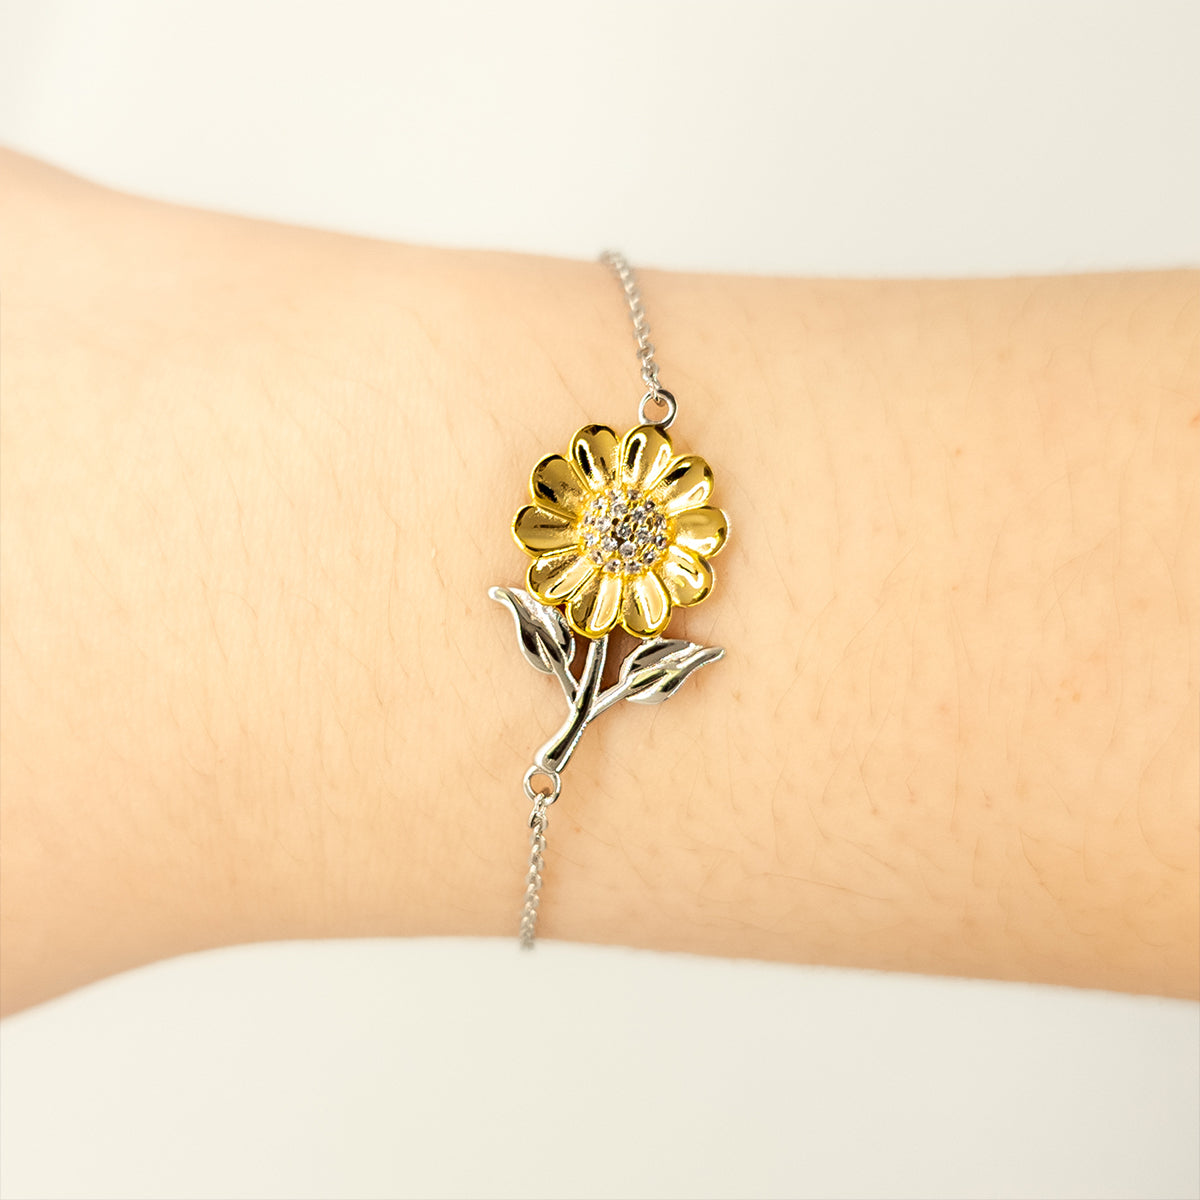 Daughter Motivational Gifts from Mama, Remember to never give up no matter what, Inspirational Birthday Sunflower Bracelet for Daughter